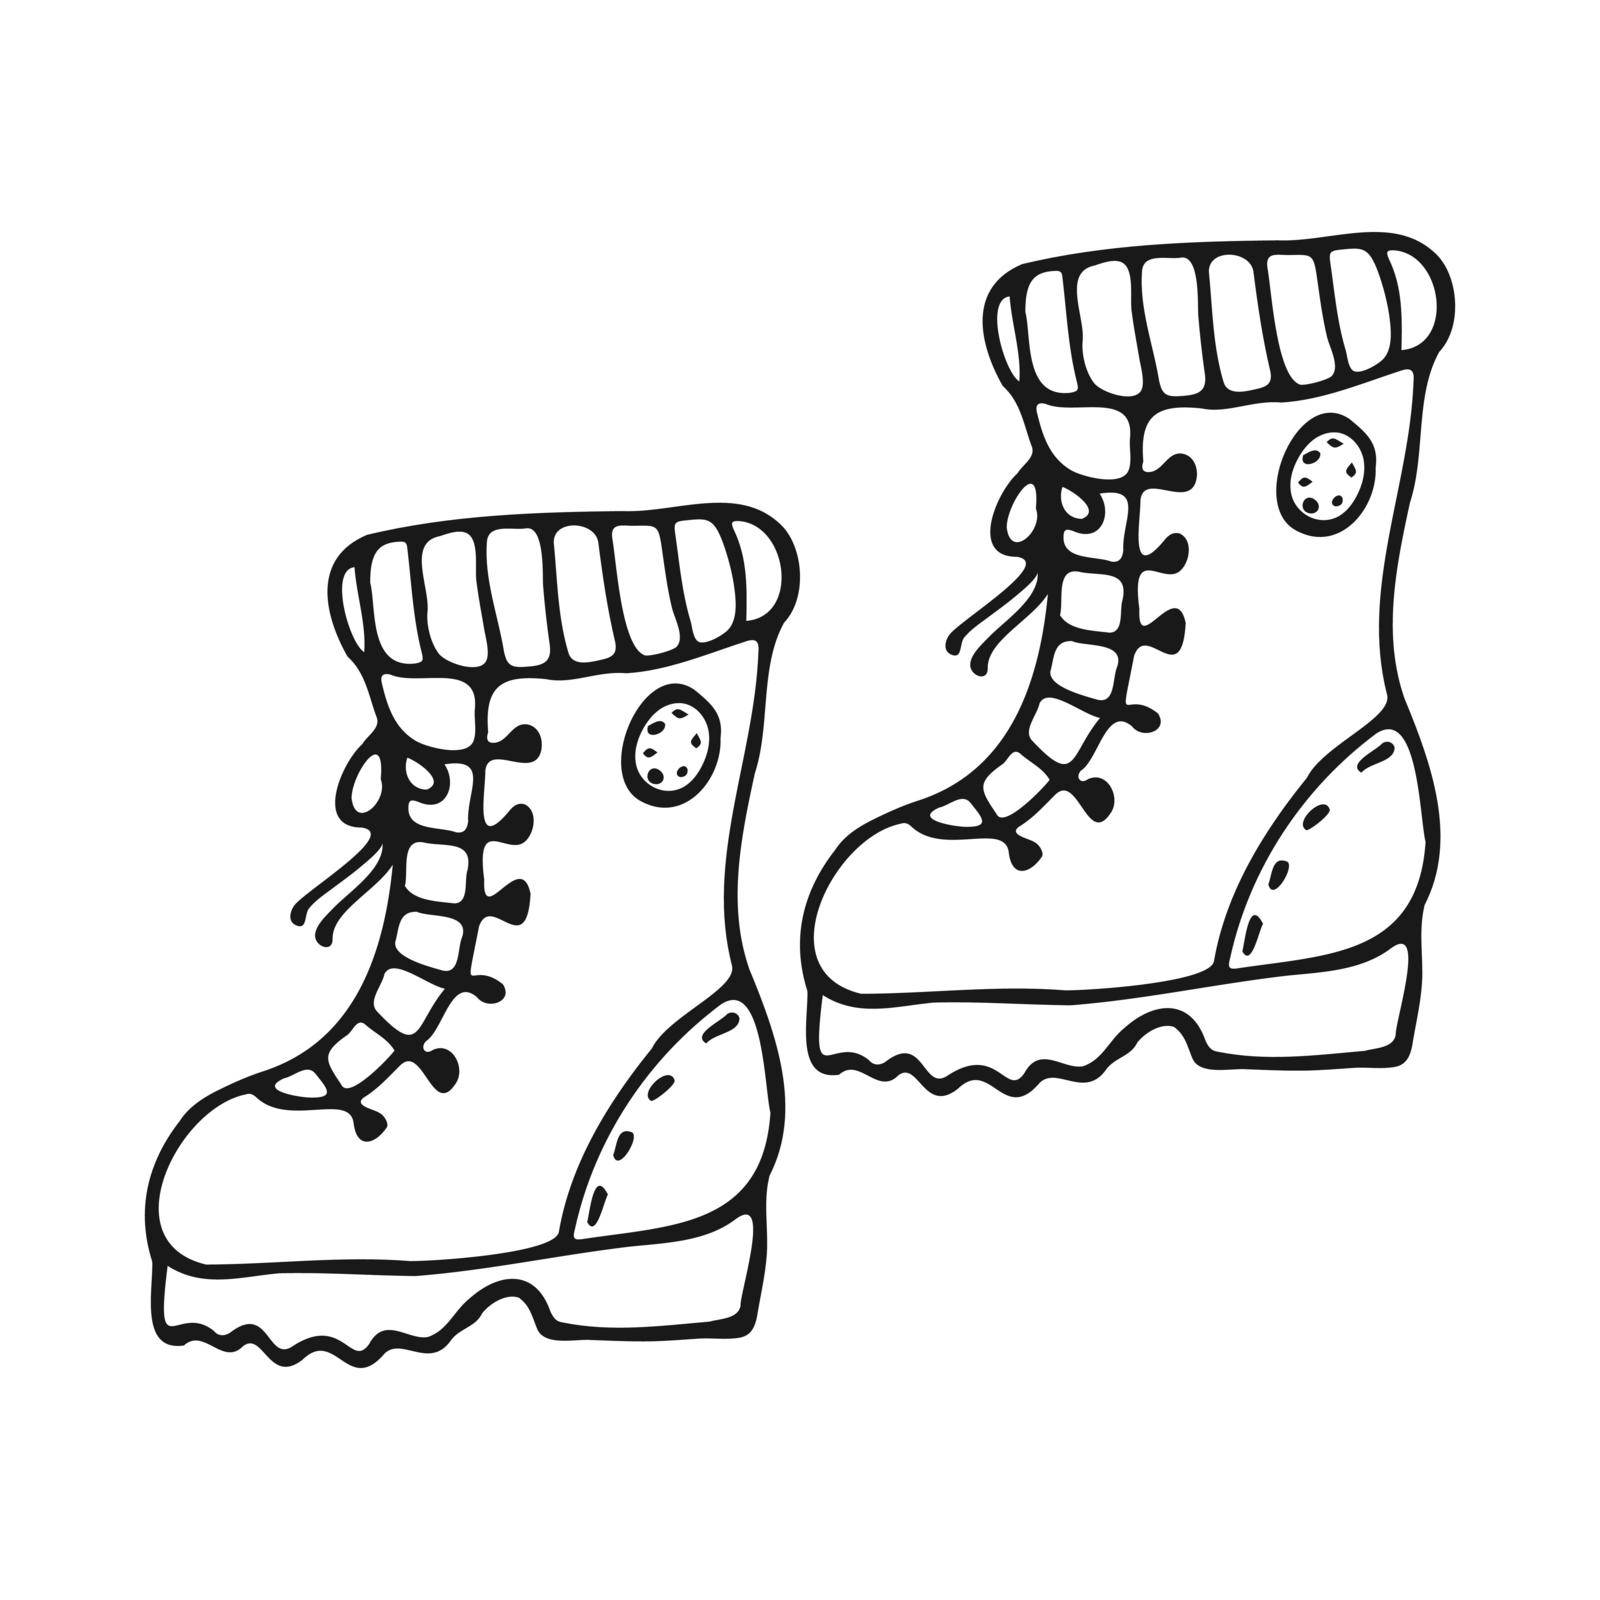 A pair of doodle-style hiking boots. Shoes hand drawn black outline on a white background. Vector illustration.